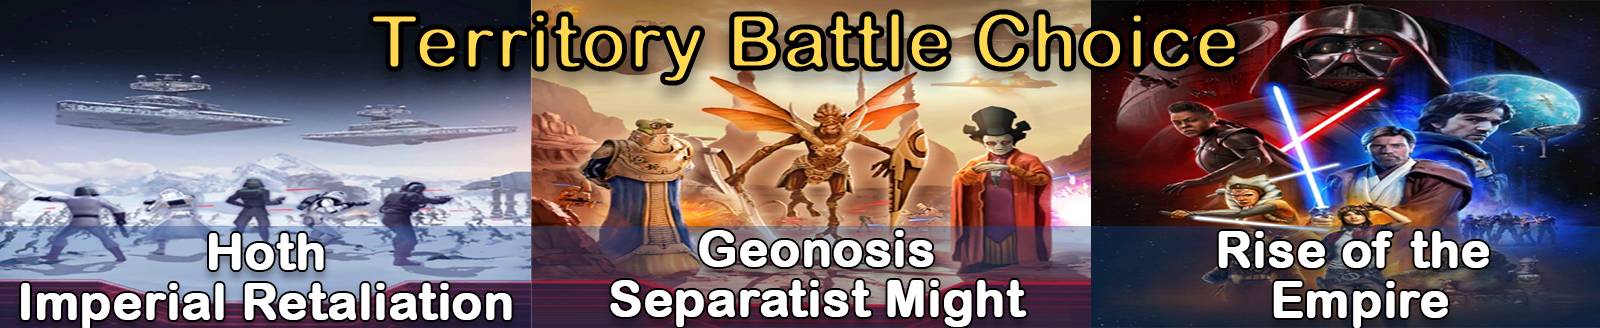 Event-Territory Battle-Imperial Retaliation & Separatist Might-Banner.png